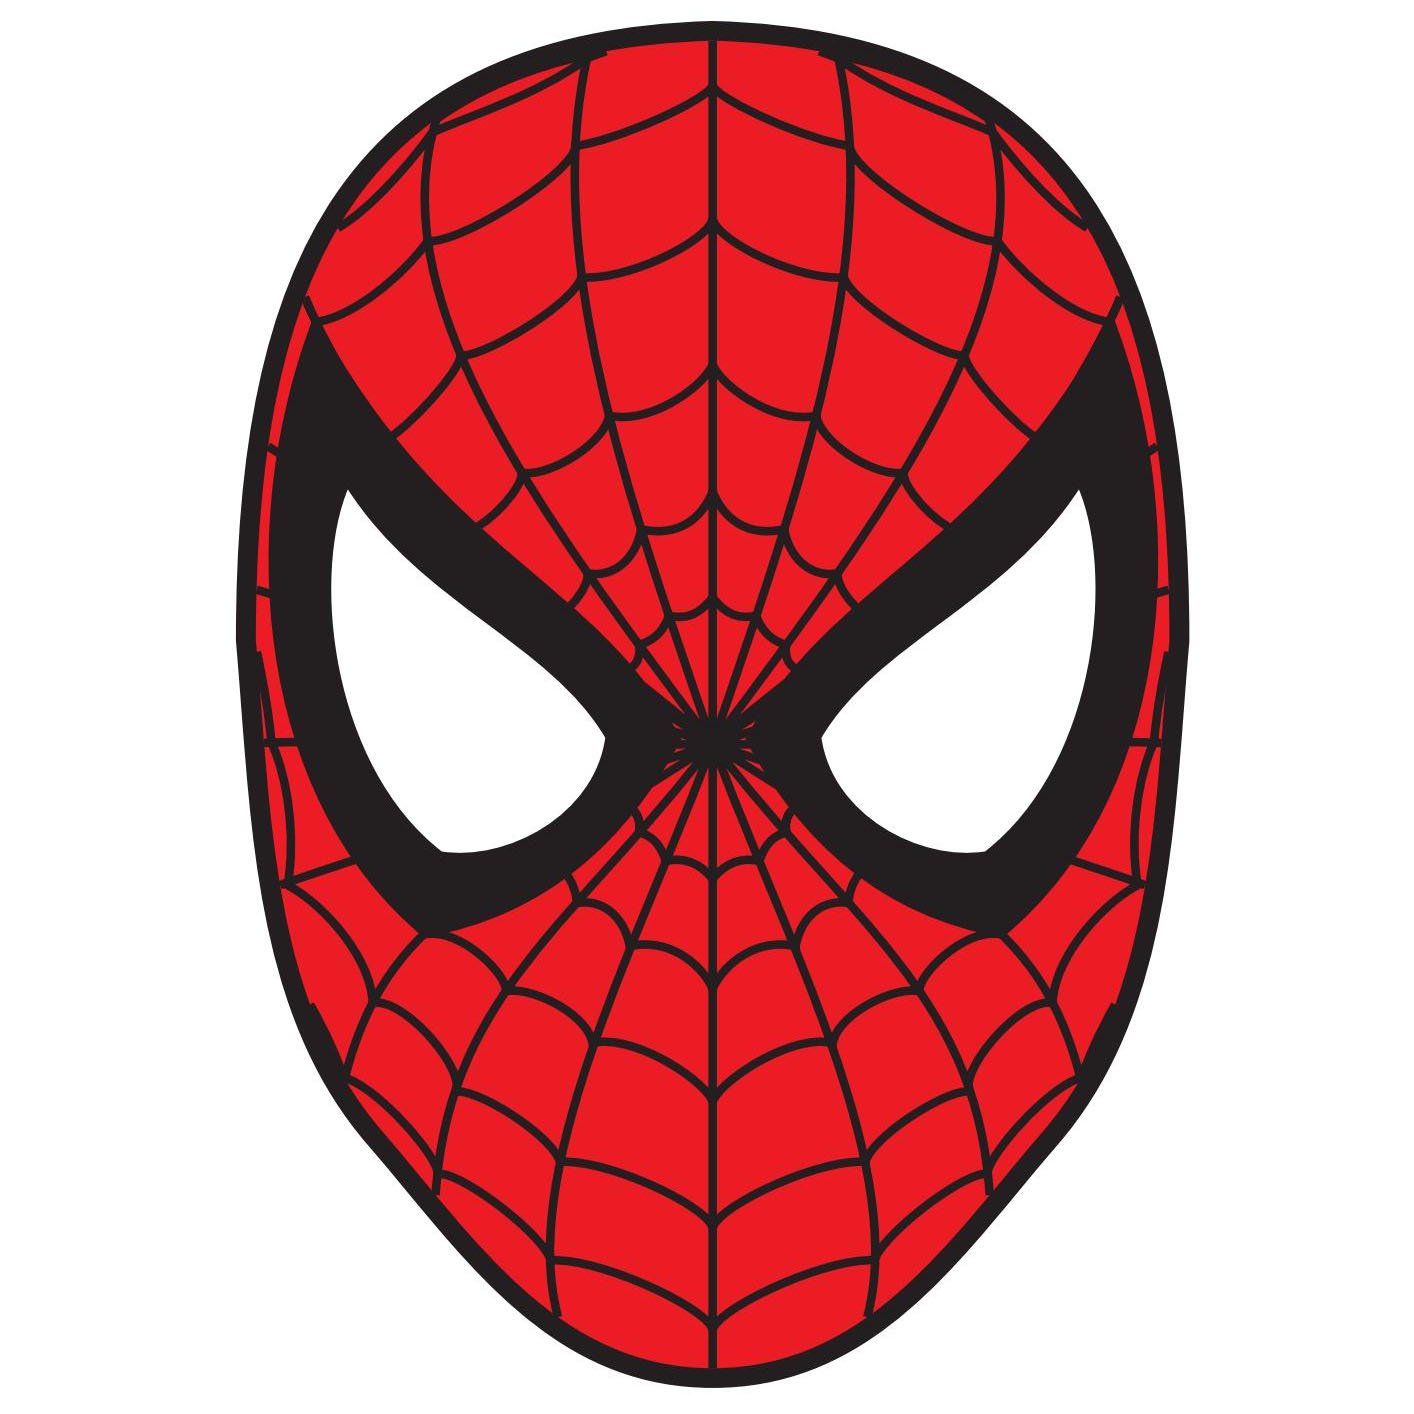 Spiderman Logo, Spiderman Symbol, Meaning, History and Evolution